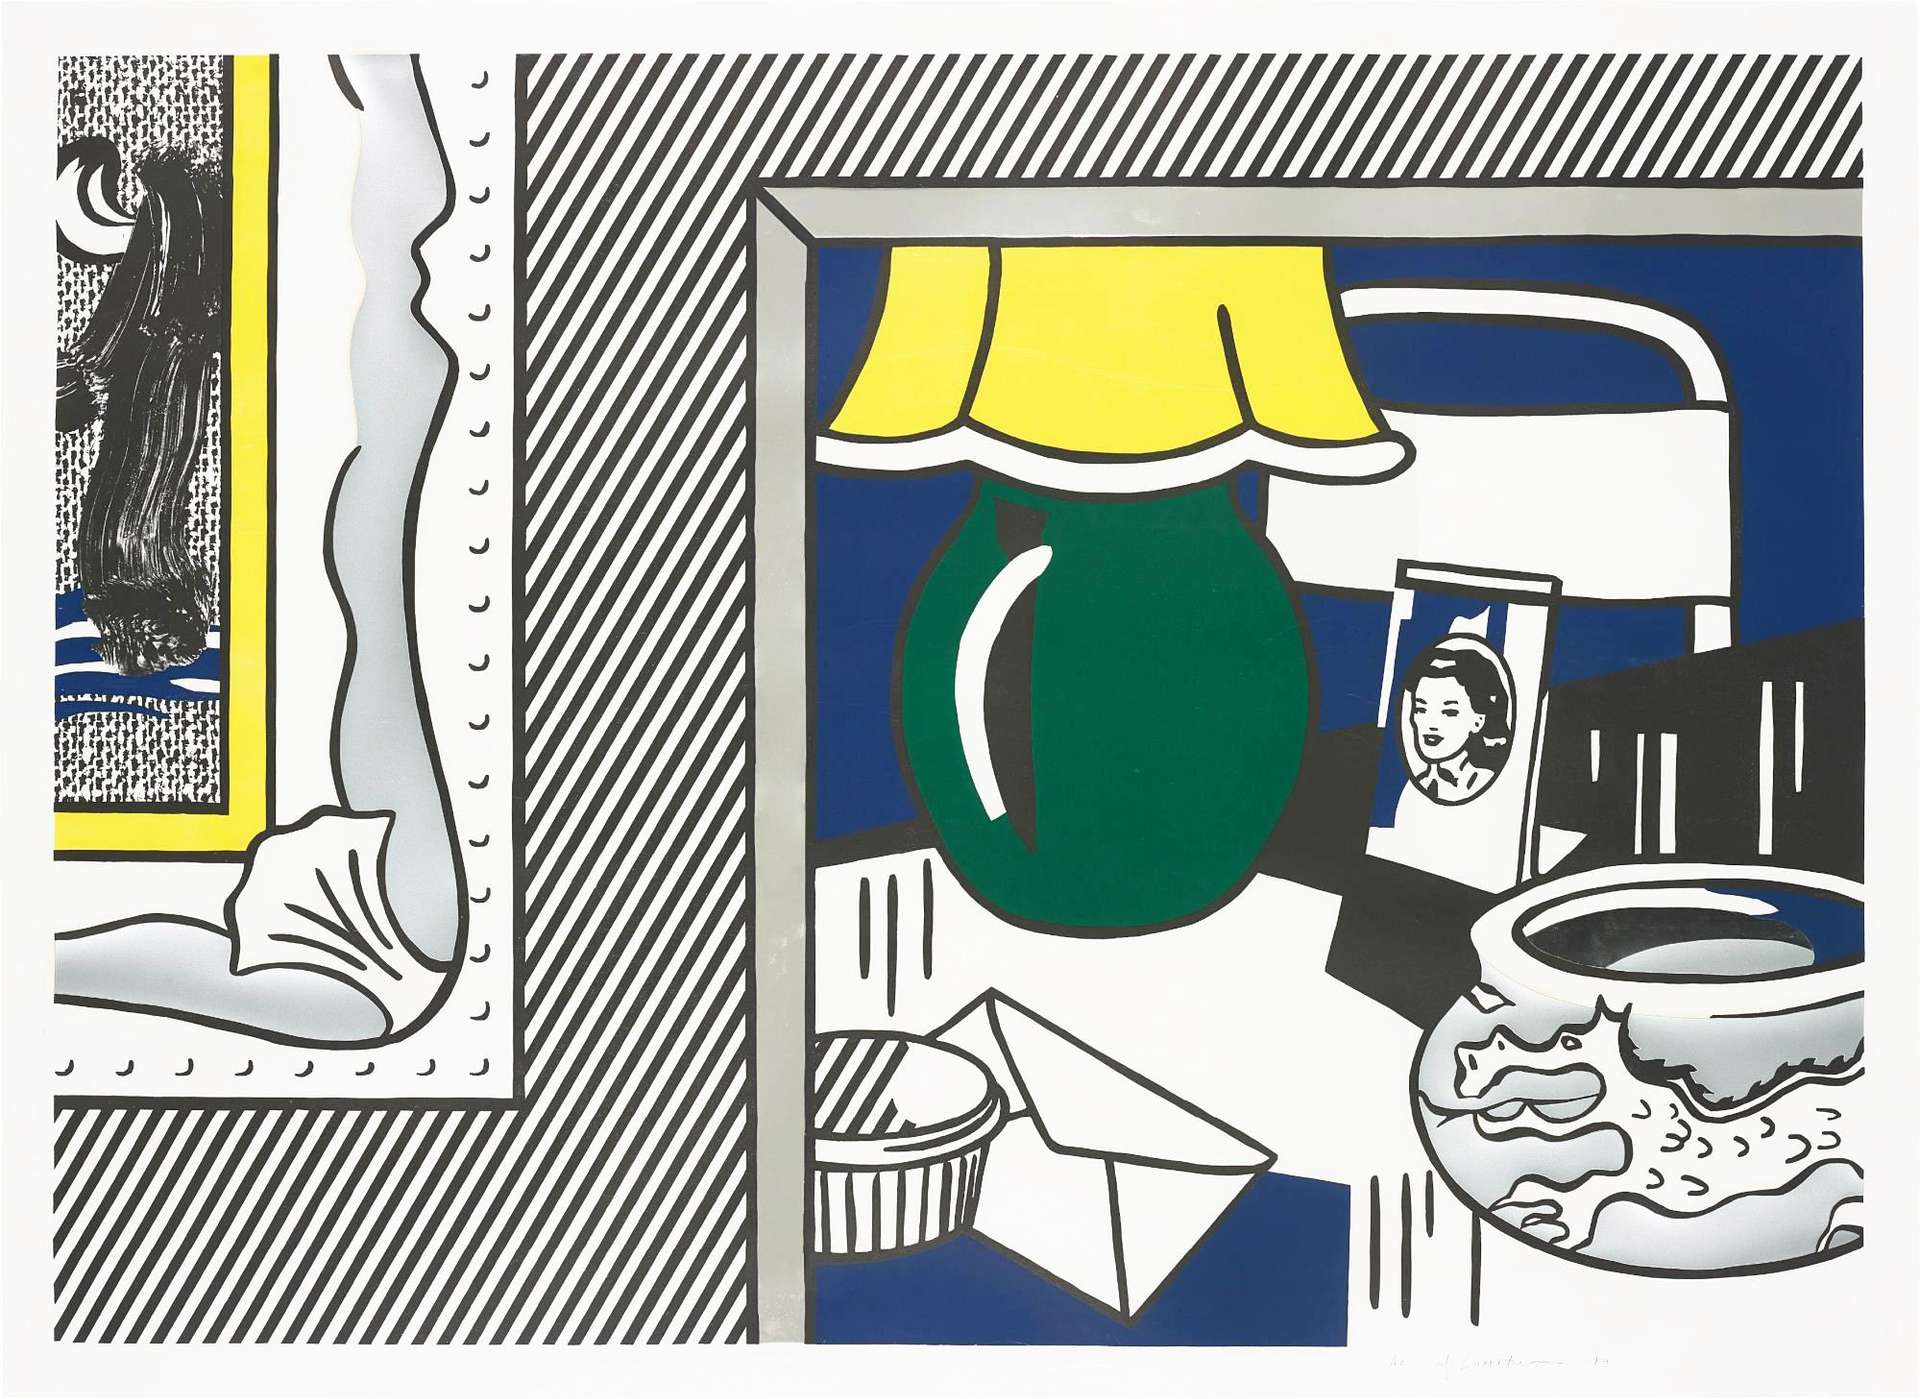 Two Paintings: Green Lamp captures two adjacent paintings mounted on a striped wall. The composition on the right is contained in a minimalistic silver frame. It is a brilliant modernist still life depiction, recalling Lichtenstein’s Six Still Lifesof the early 1970s. On the left hangs a baroque style silver frame, with a bright yellow passepartout. The portrait within exhibits emotive black sweeps, superimposed on blue cartoon brushstrokes. 